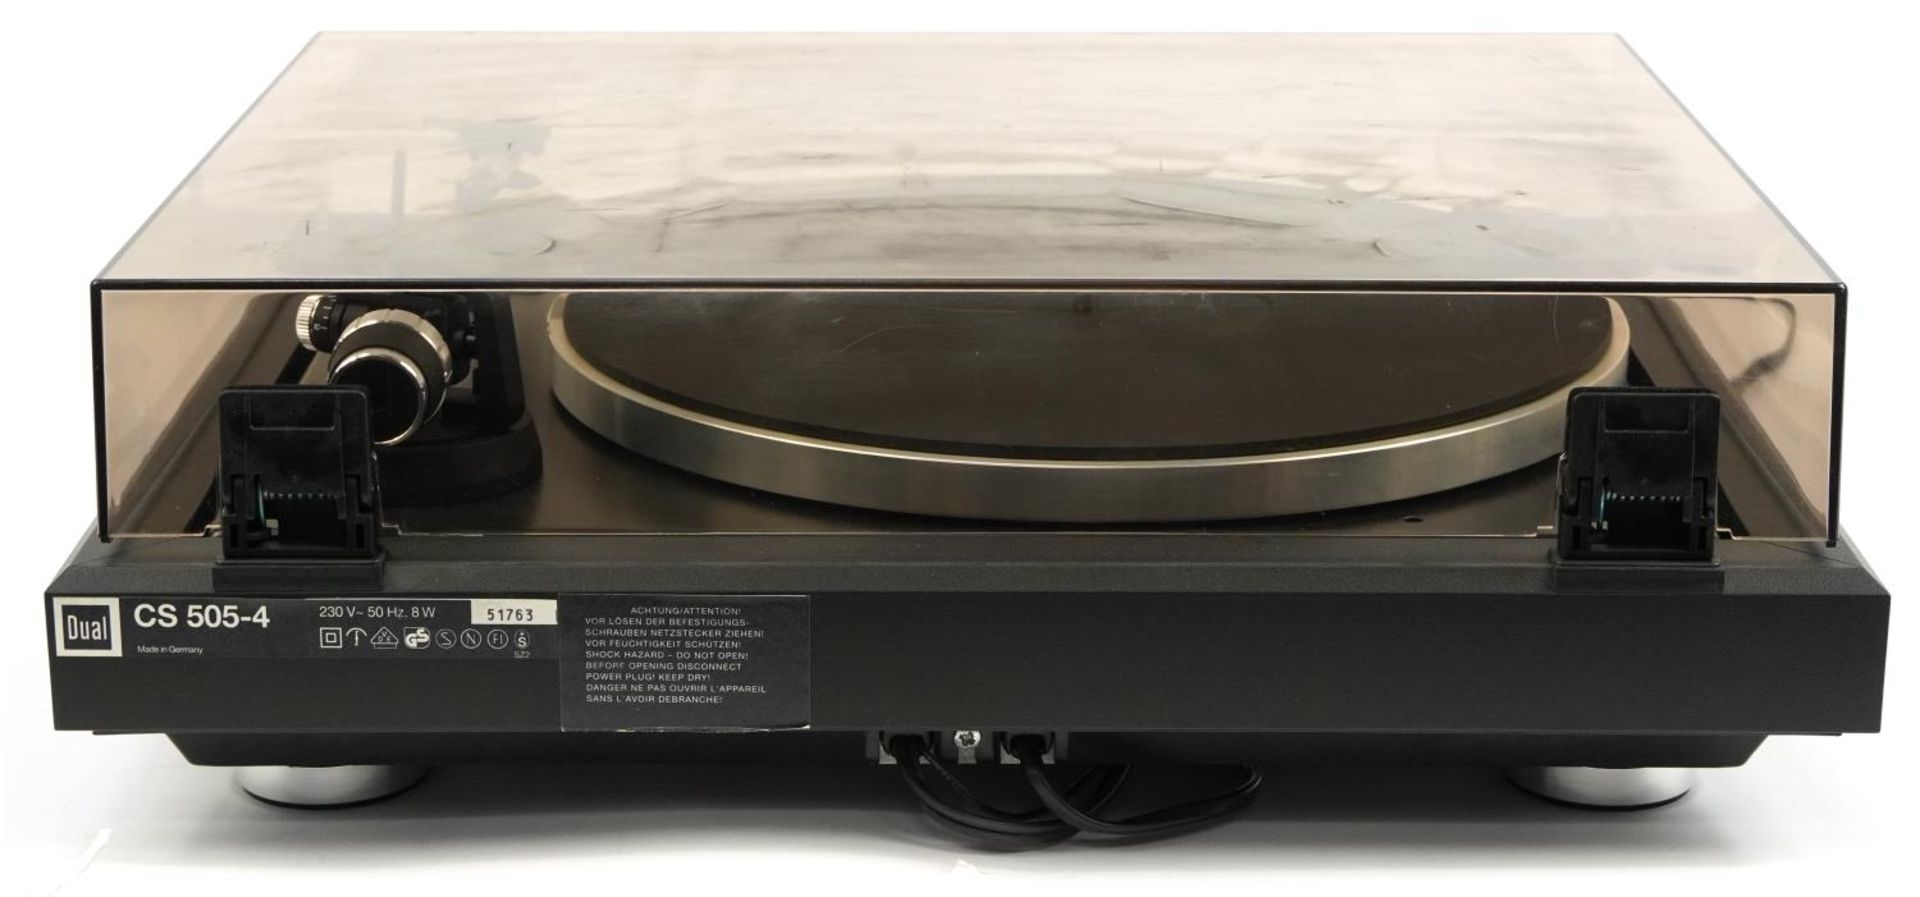 Audiophile Concept dual belt drive system turntable, model CS 505-4 For further information on - Image 3 of 4